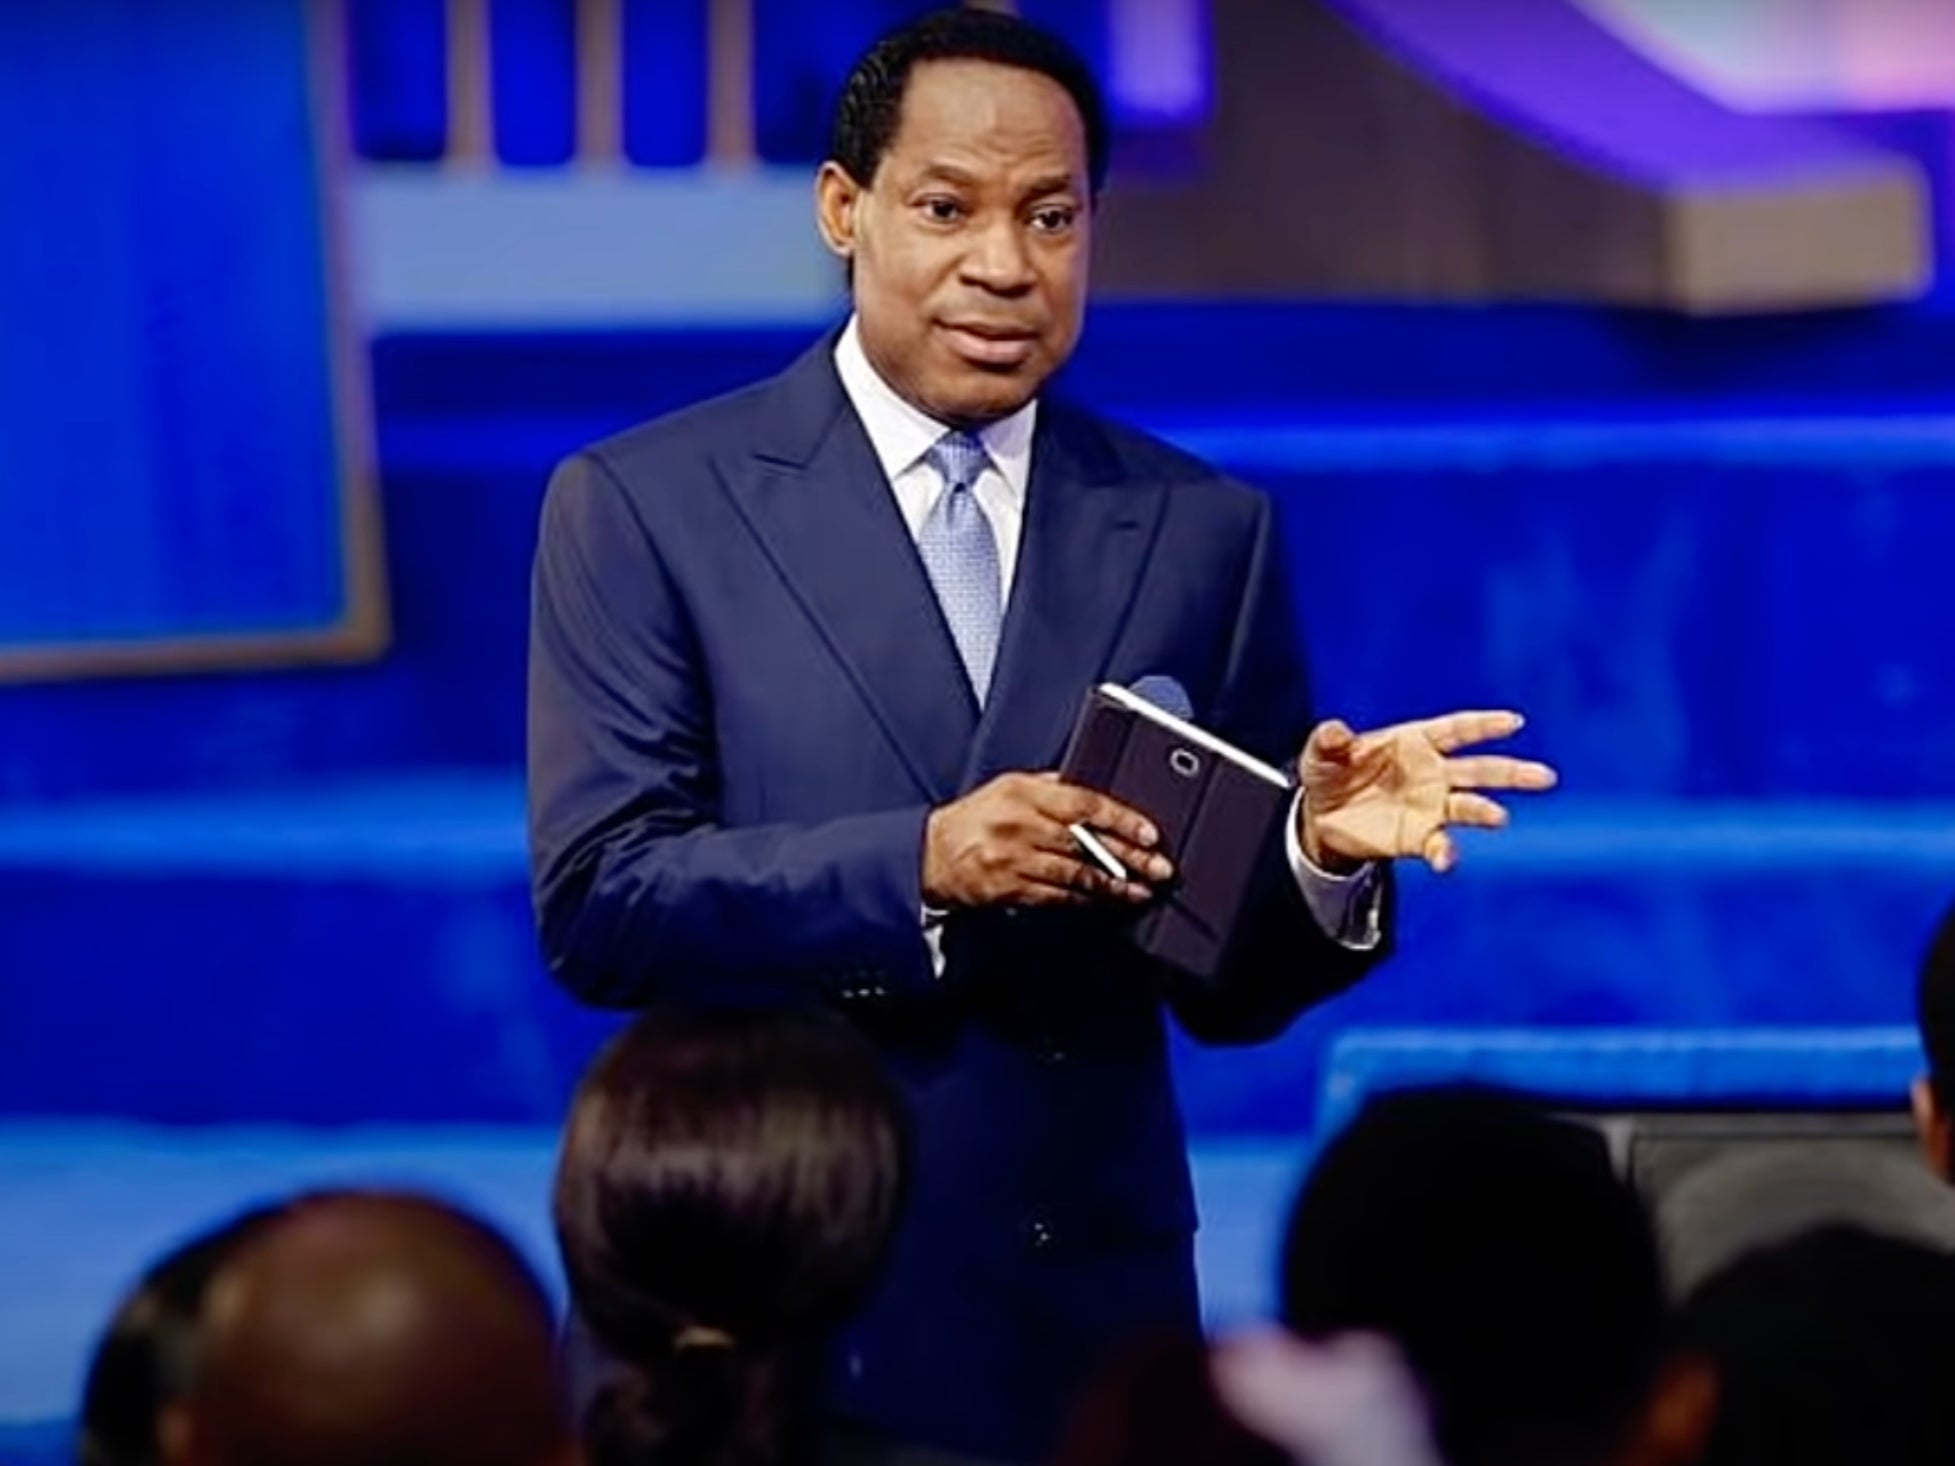 Loveworld, also known as Christ Embassy, is an evangelical ministry founded by pastor Chris Oyakhilome